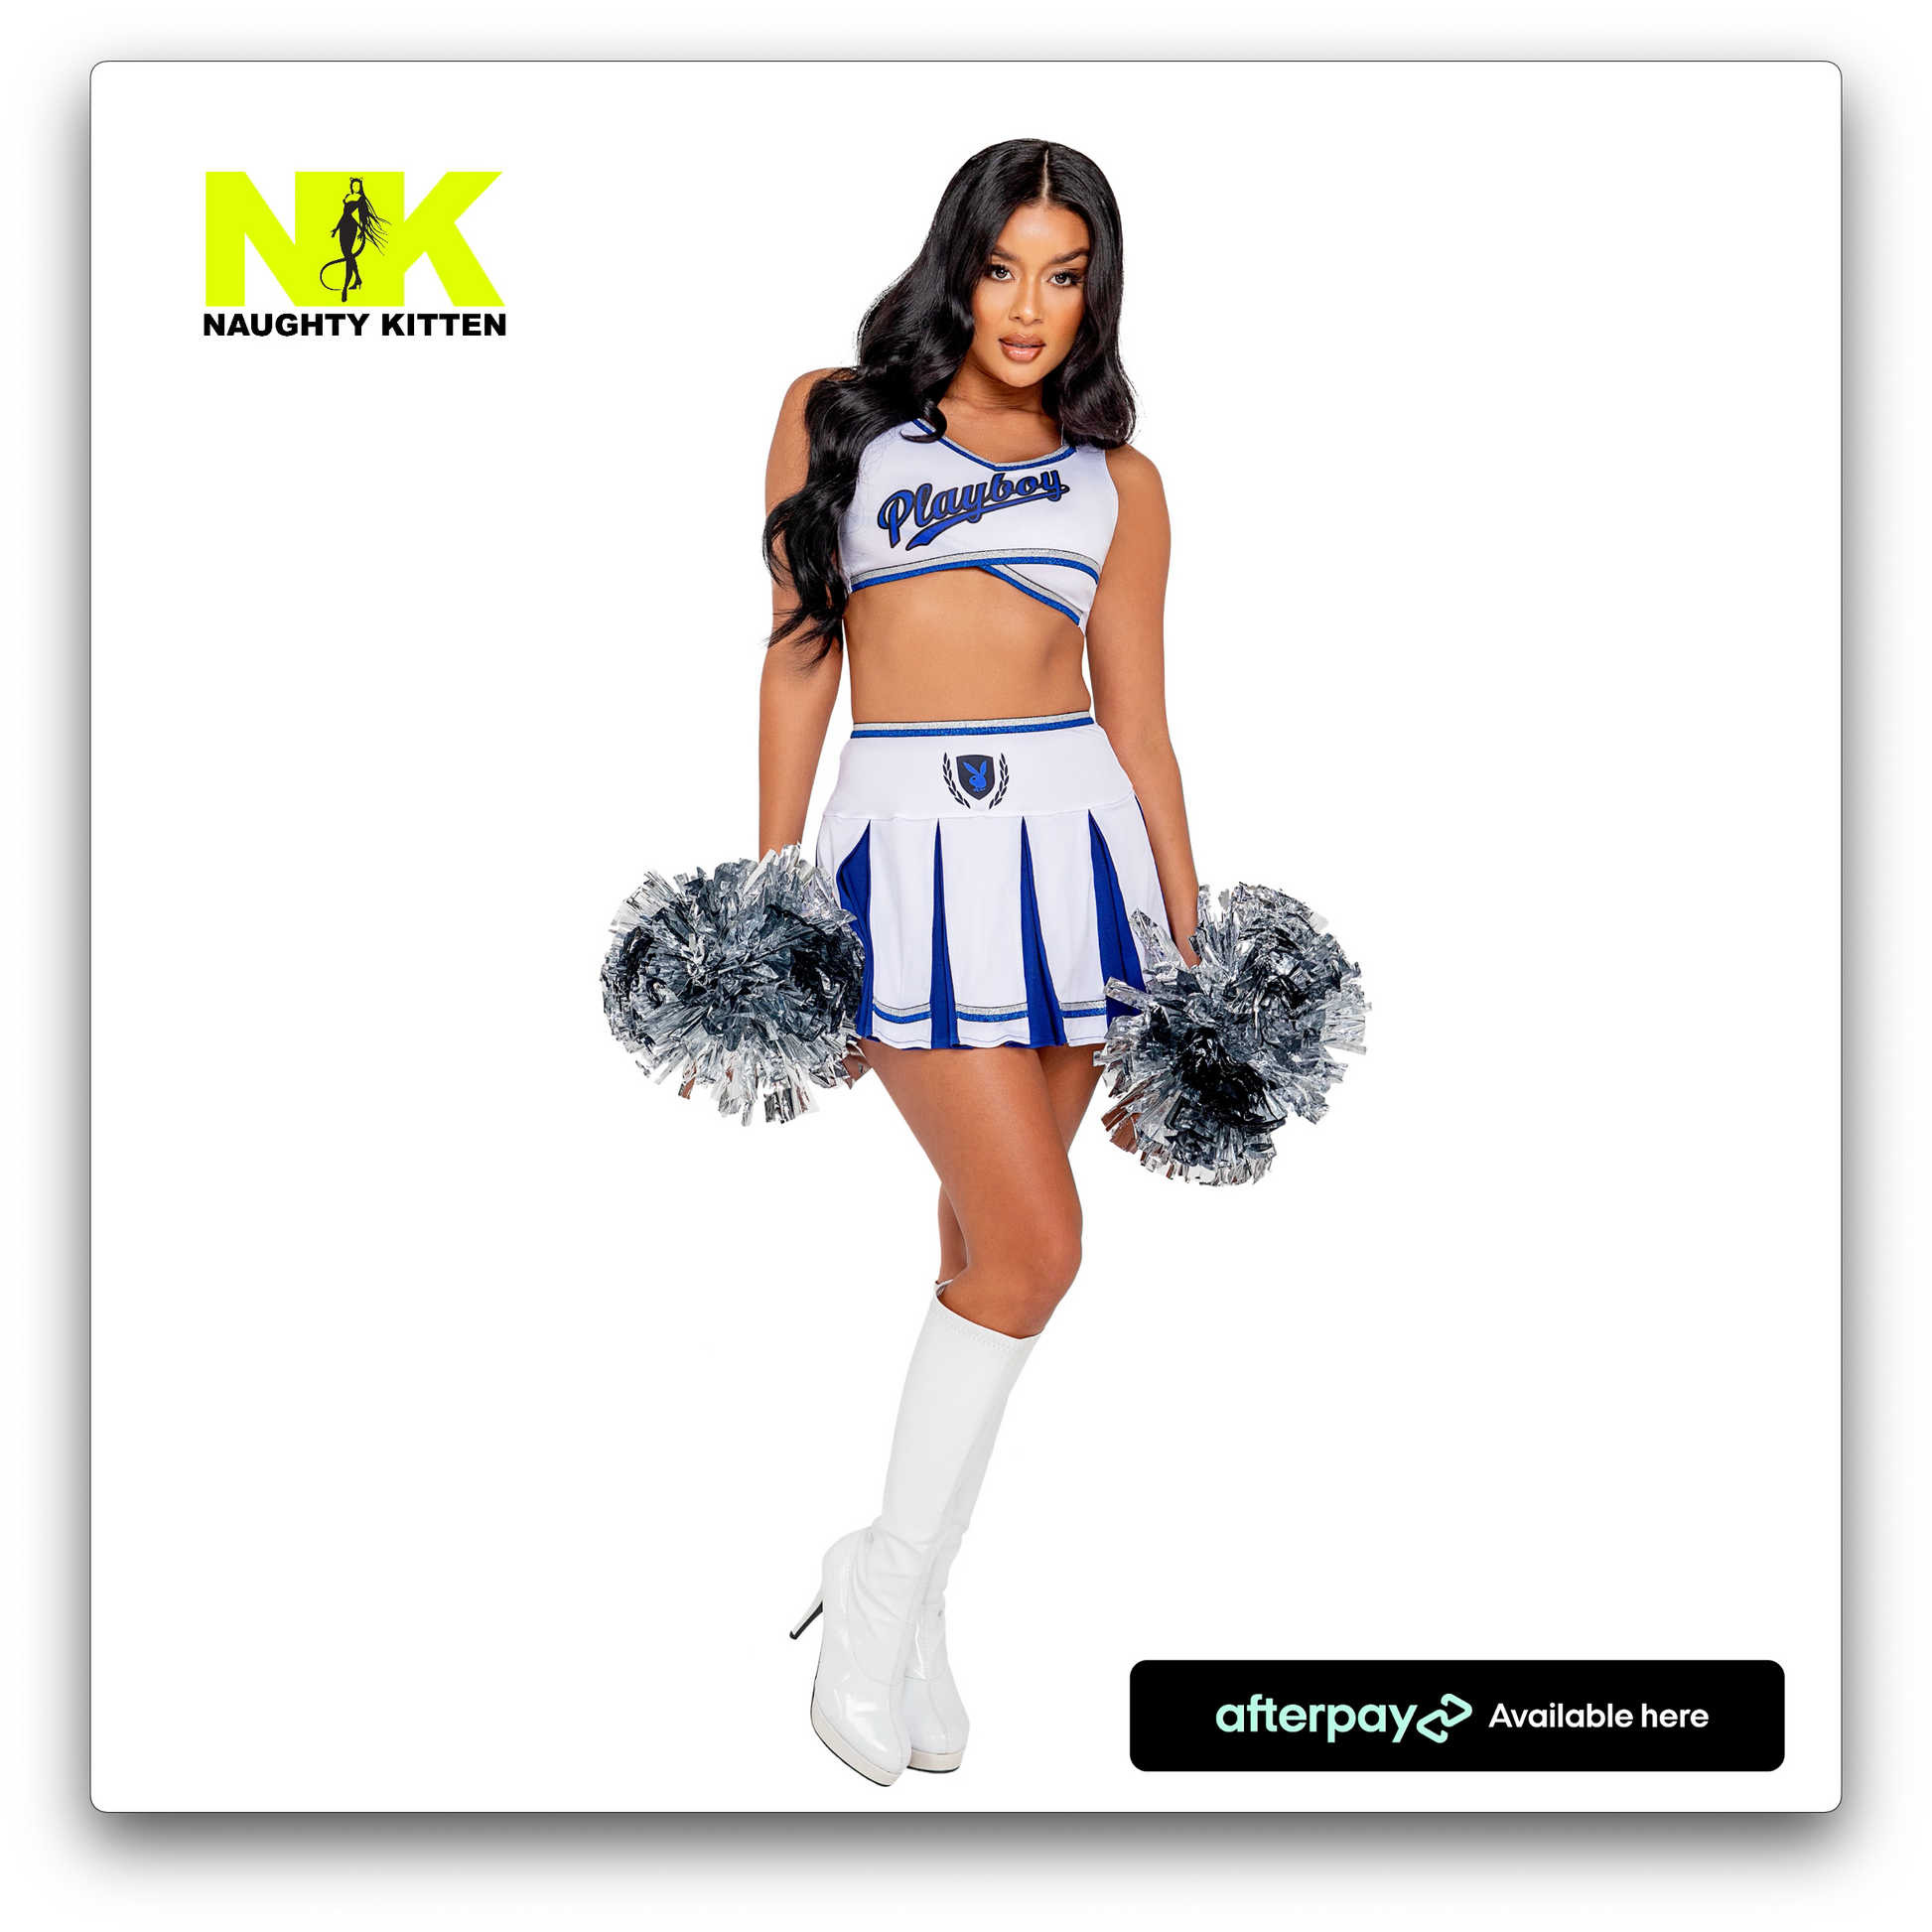 Naughty Kitten Clothing Playboy Cheer Squad Costume White/Blue front View Playboy Costume